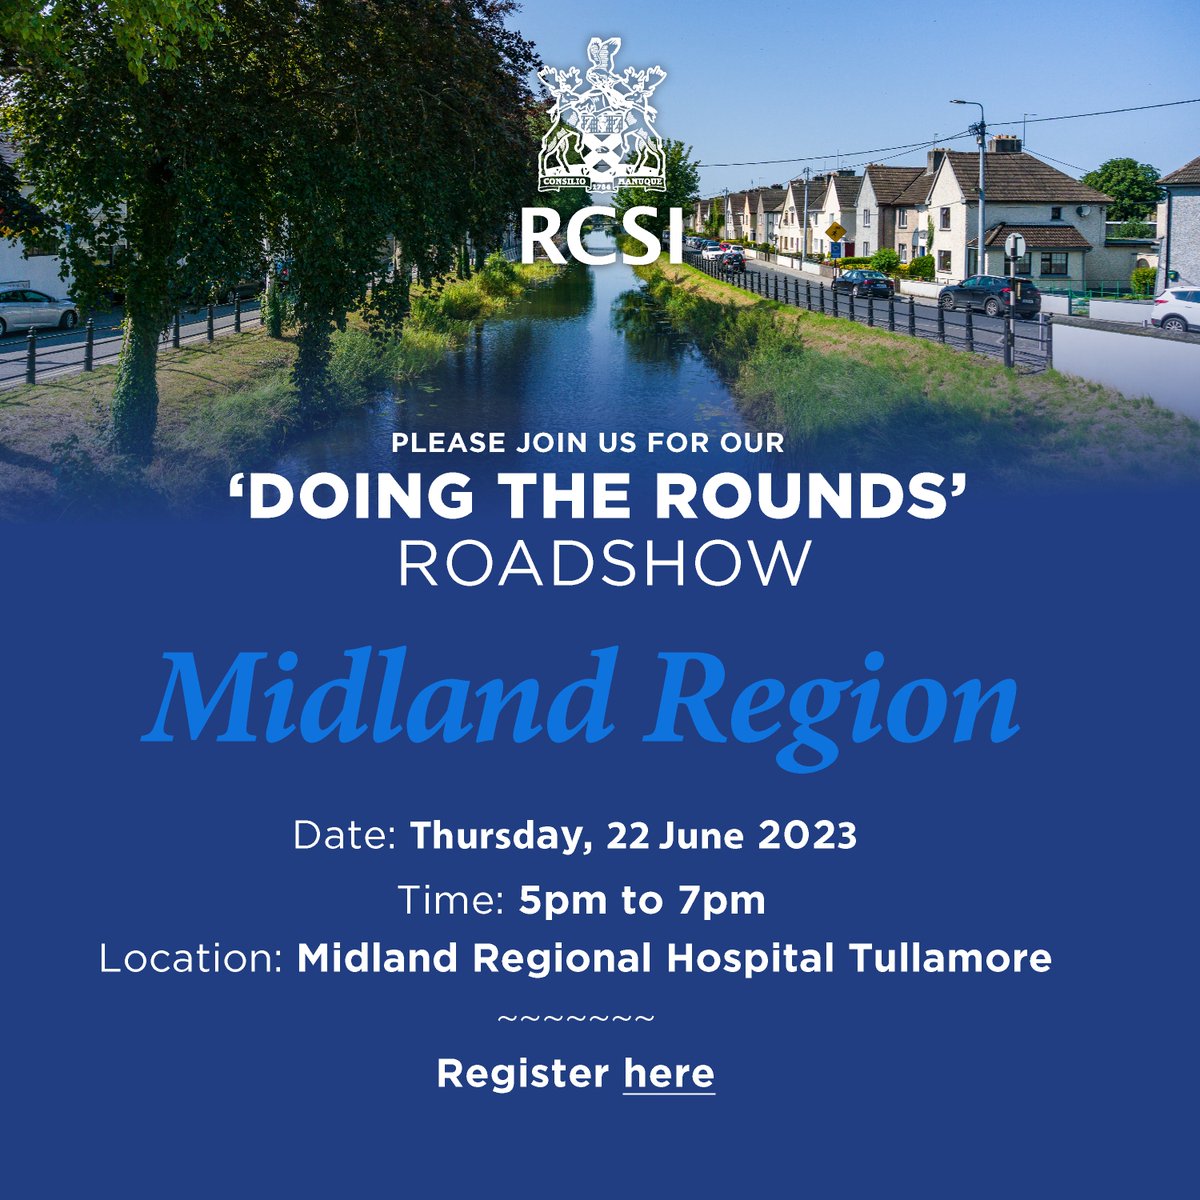 Registration for our 'Doing The Rounds Roadshow' is now live for our event in the Midlands region. For more information, click here: bit.ly/42bvW7Q